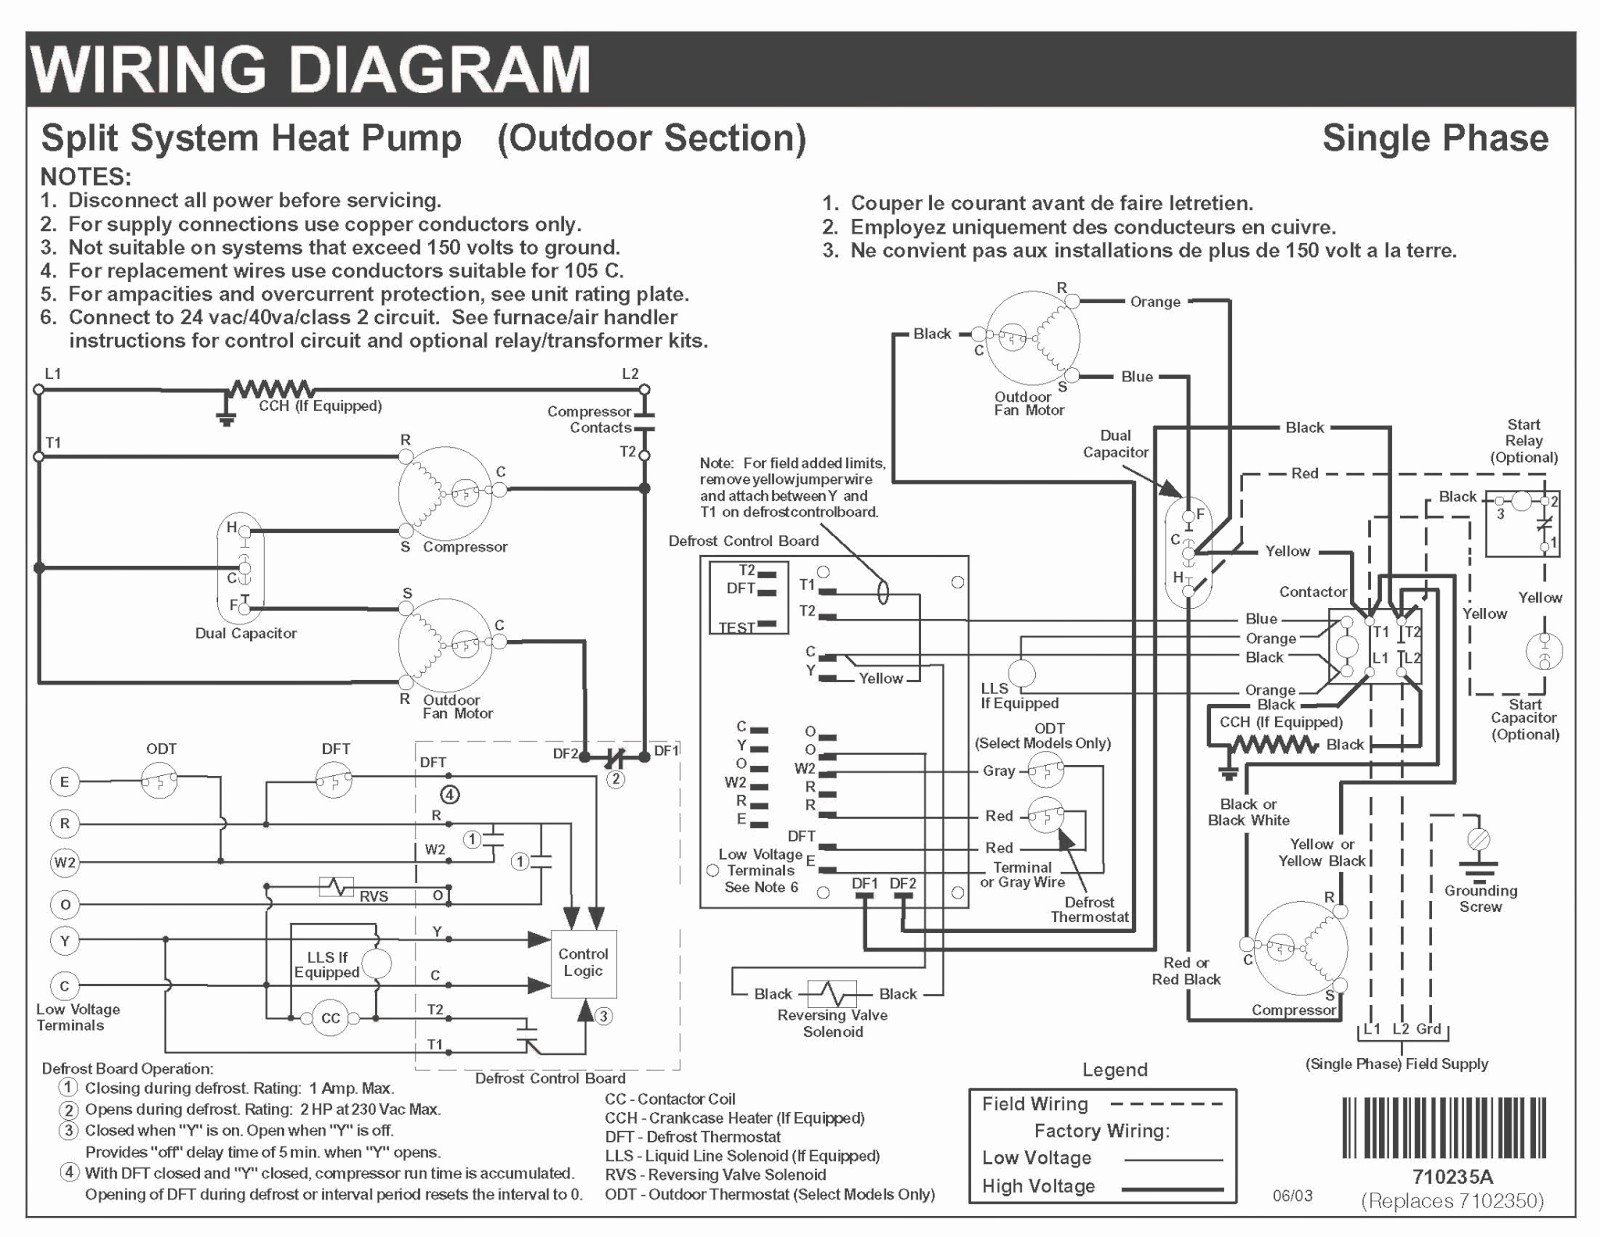 Full Size of Wiring Diagram Pioneer Deh 1900mp Wiring Diagram Luxury Excellent Pioneer Wiring Diagram